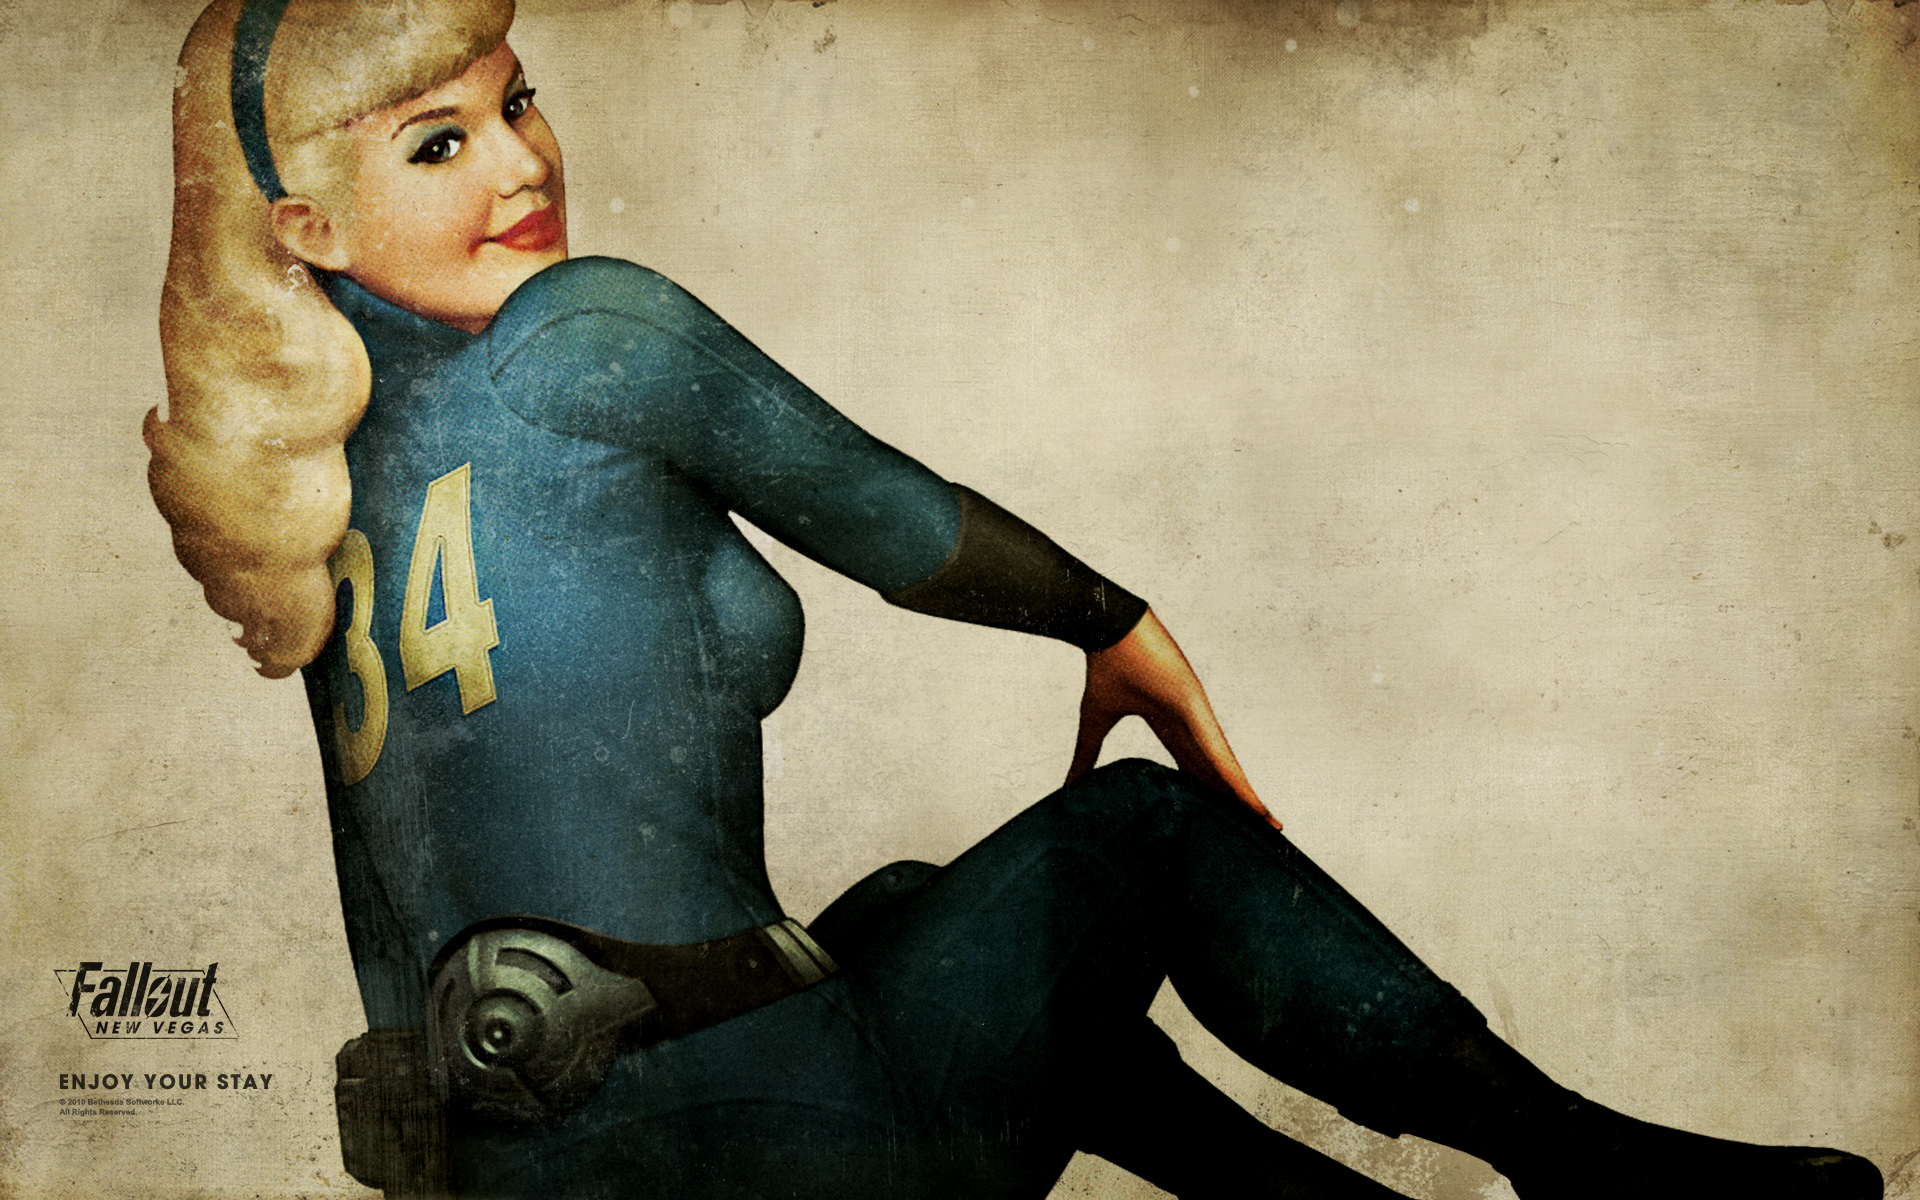 Fallout-themed desktop wallpaper featuring a beautiful pearl design; perfect for gamers.